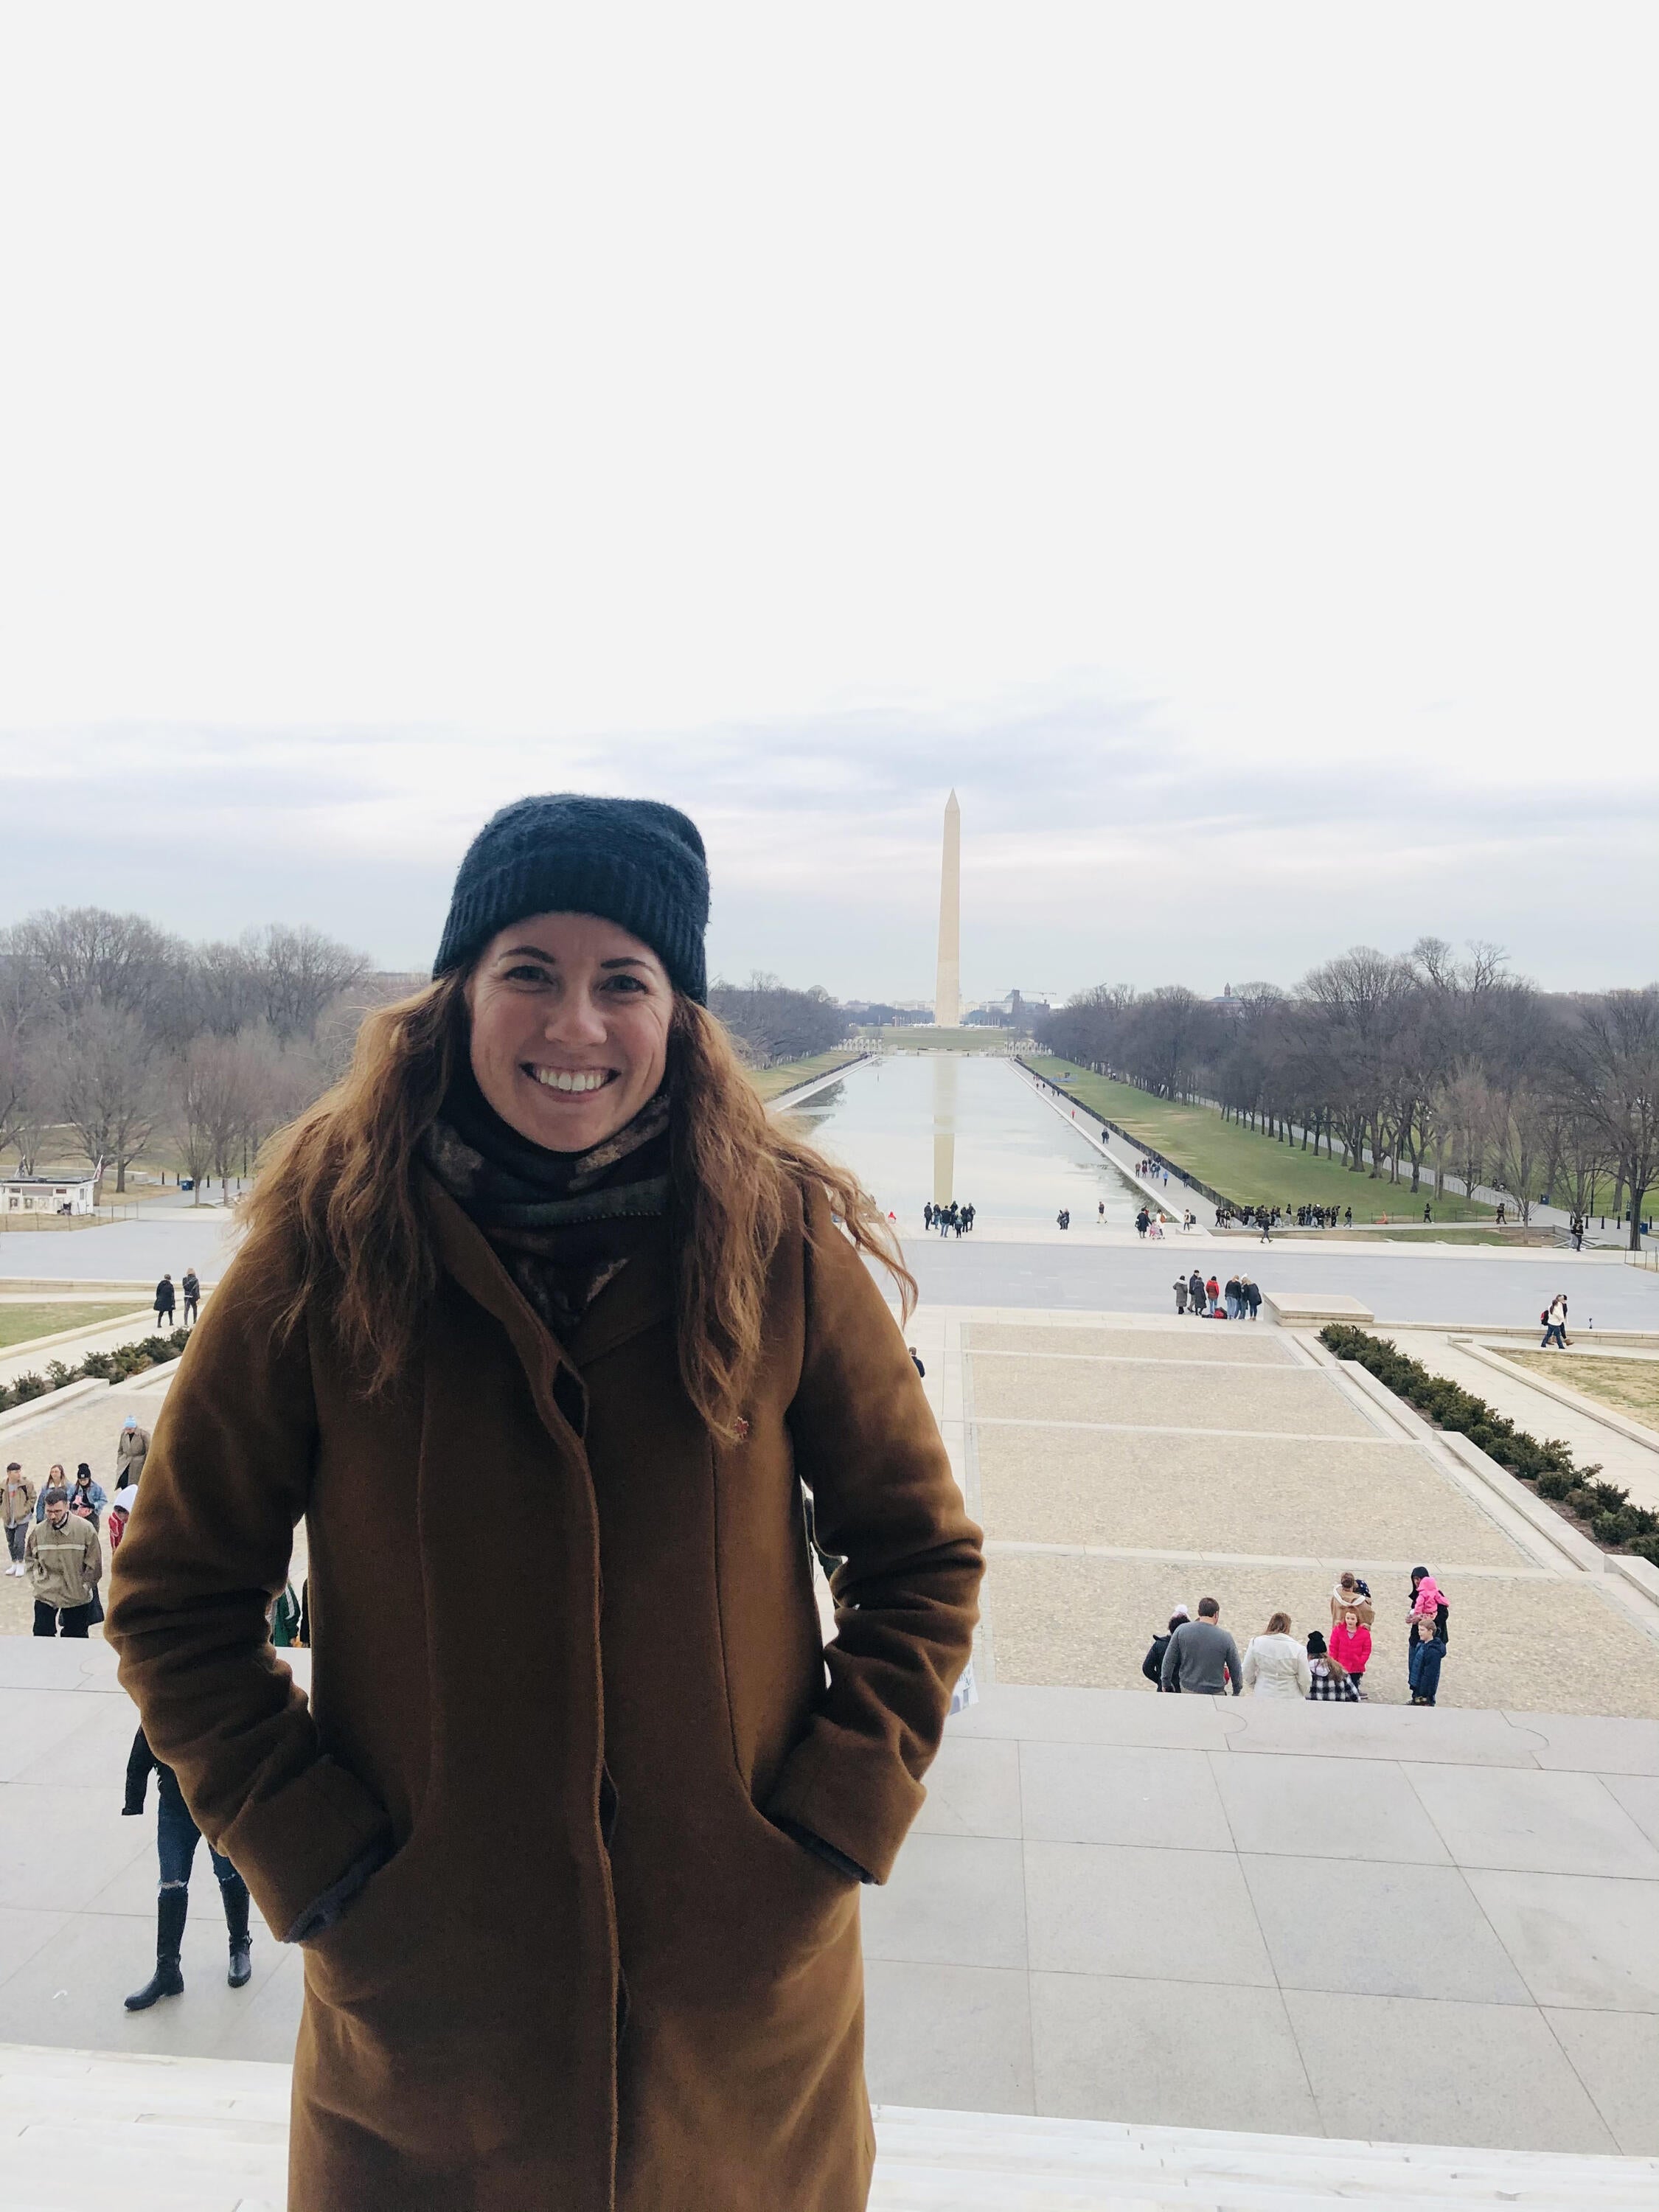 Shannon Nash in Washington DC with the National Mall and the Washington Monument behind her.